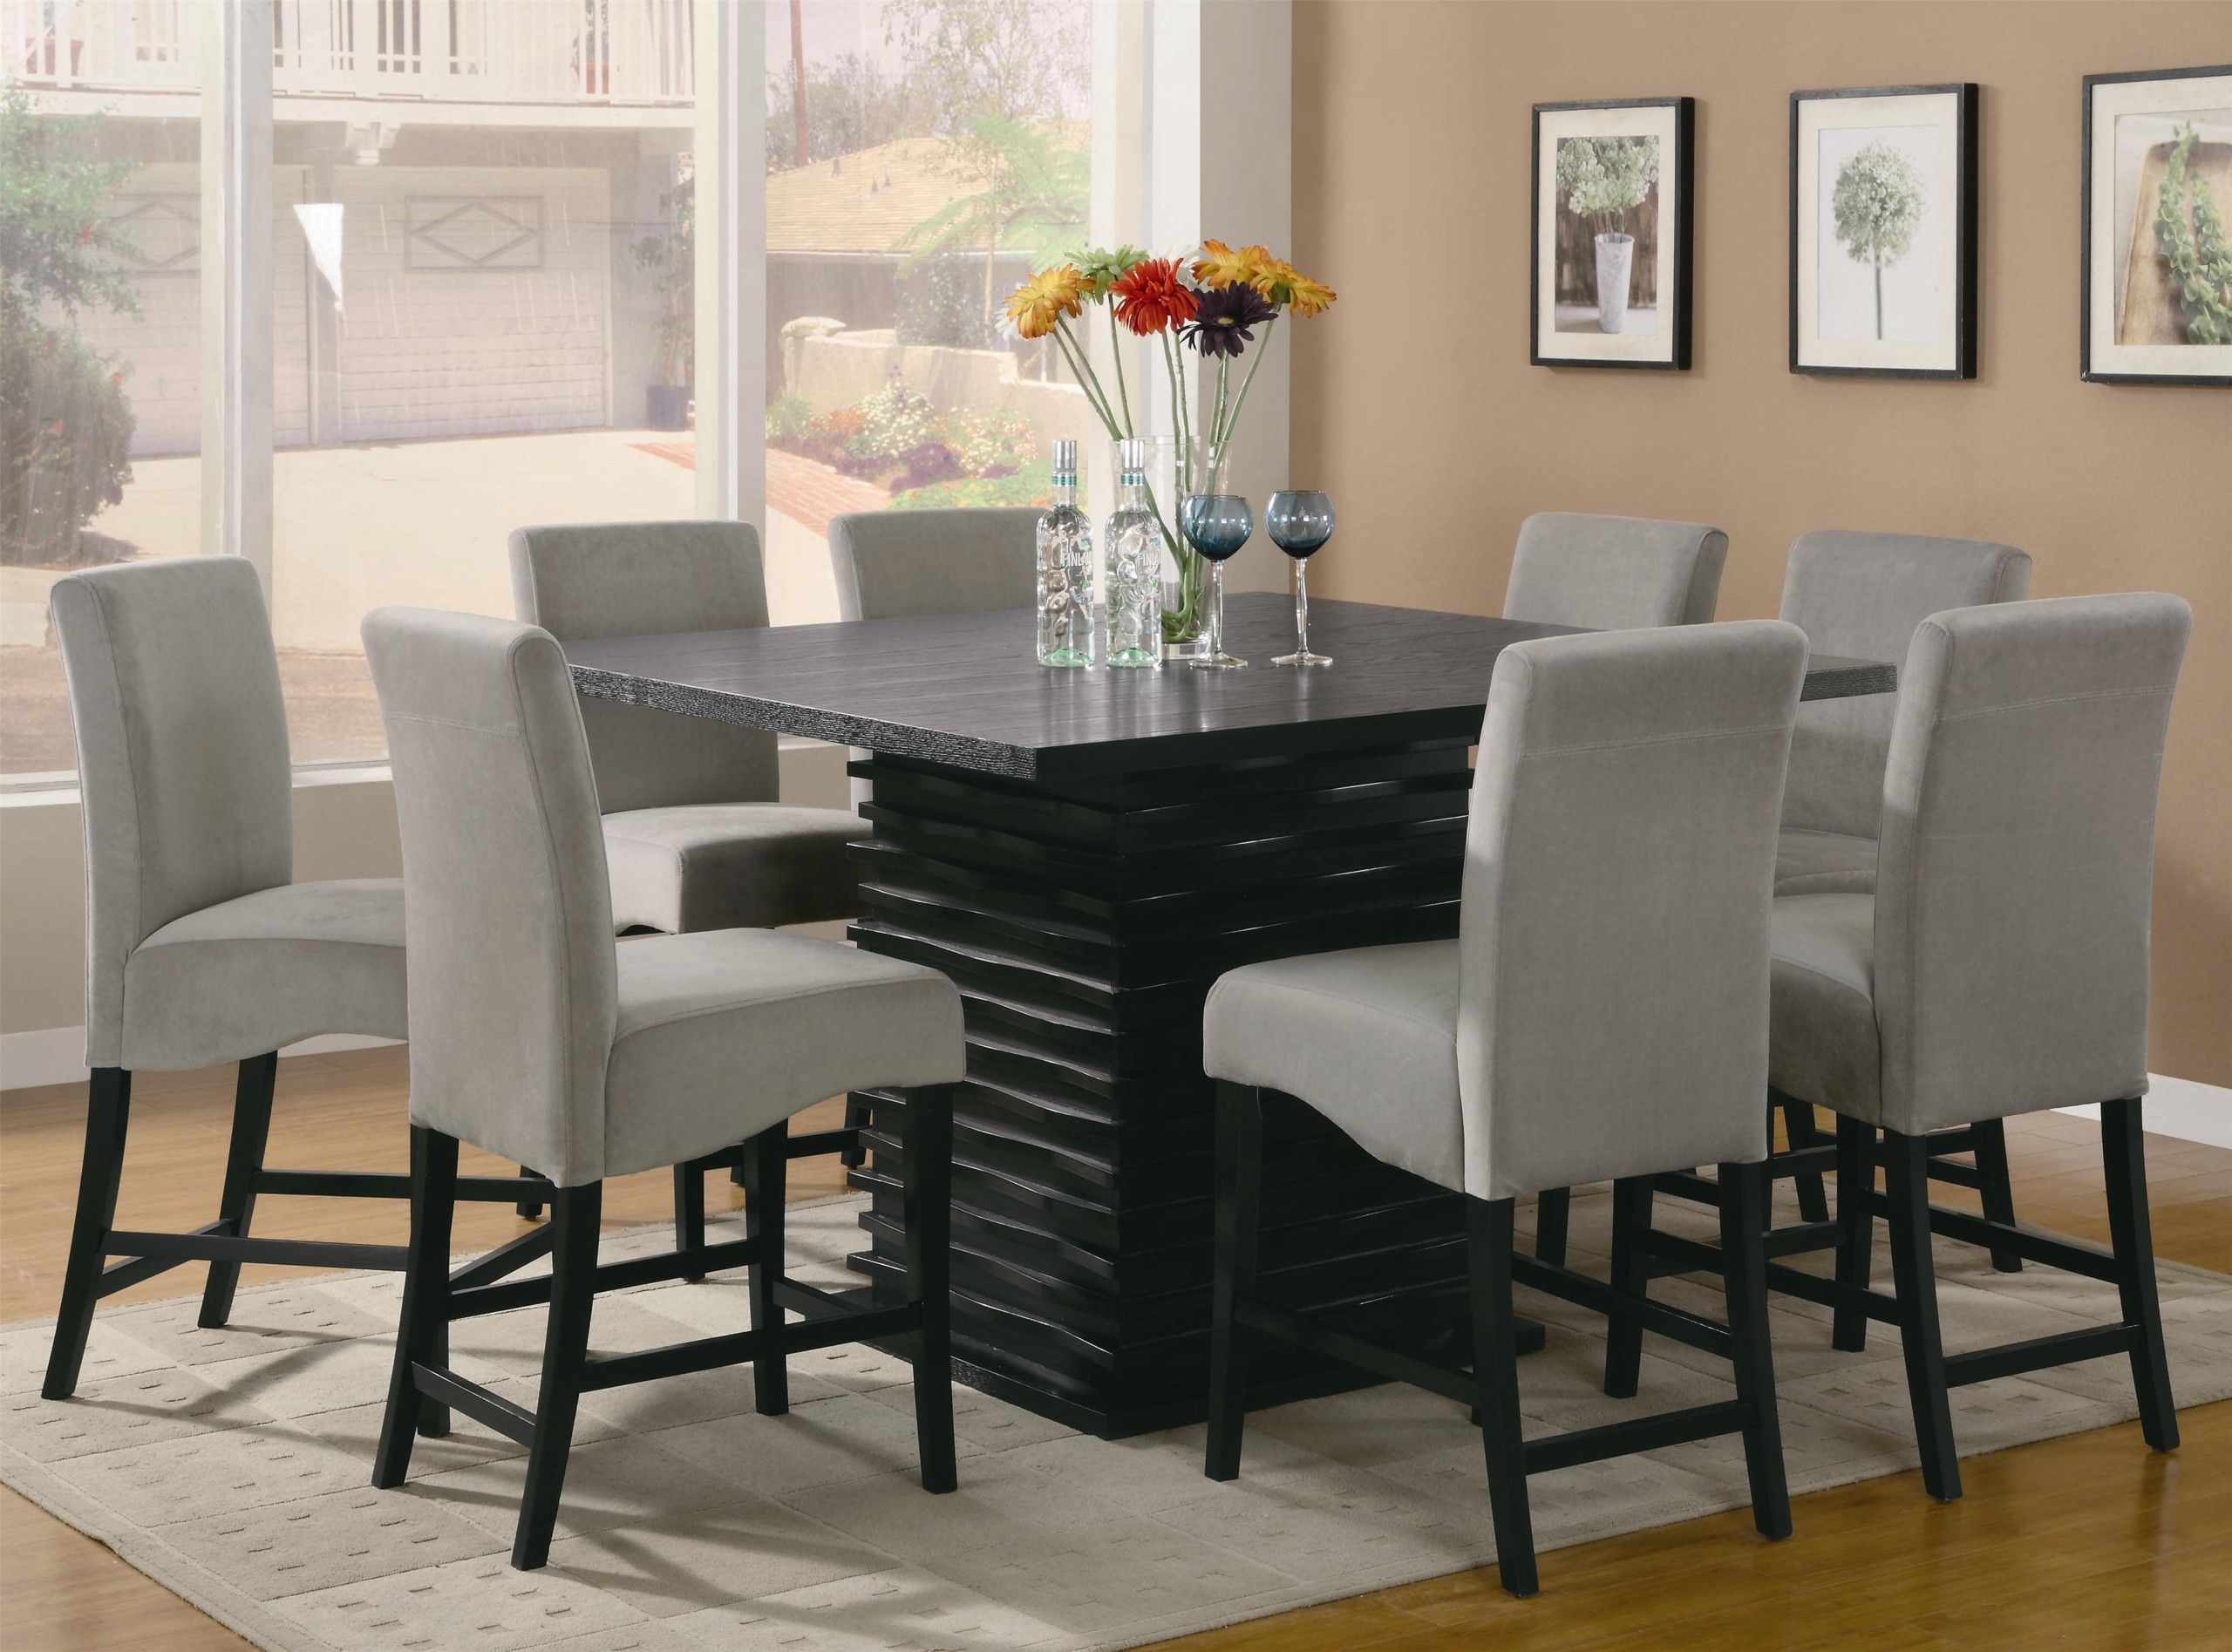 Unique counter height dining sets 5